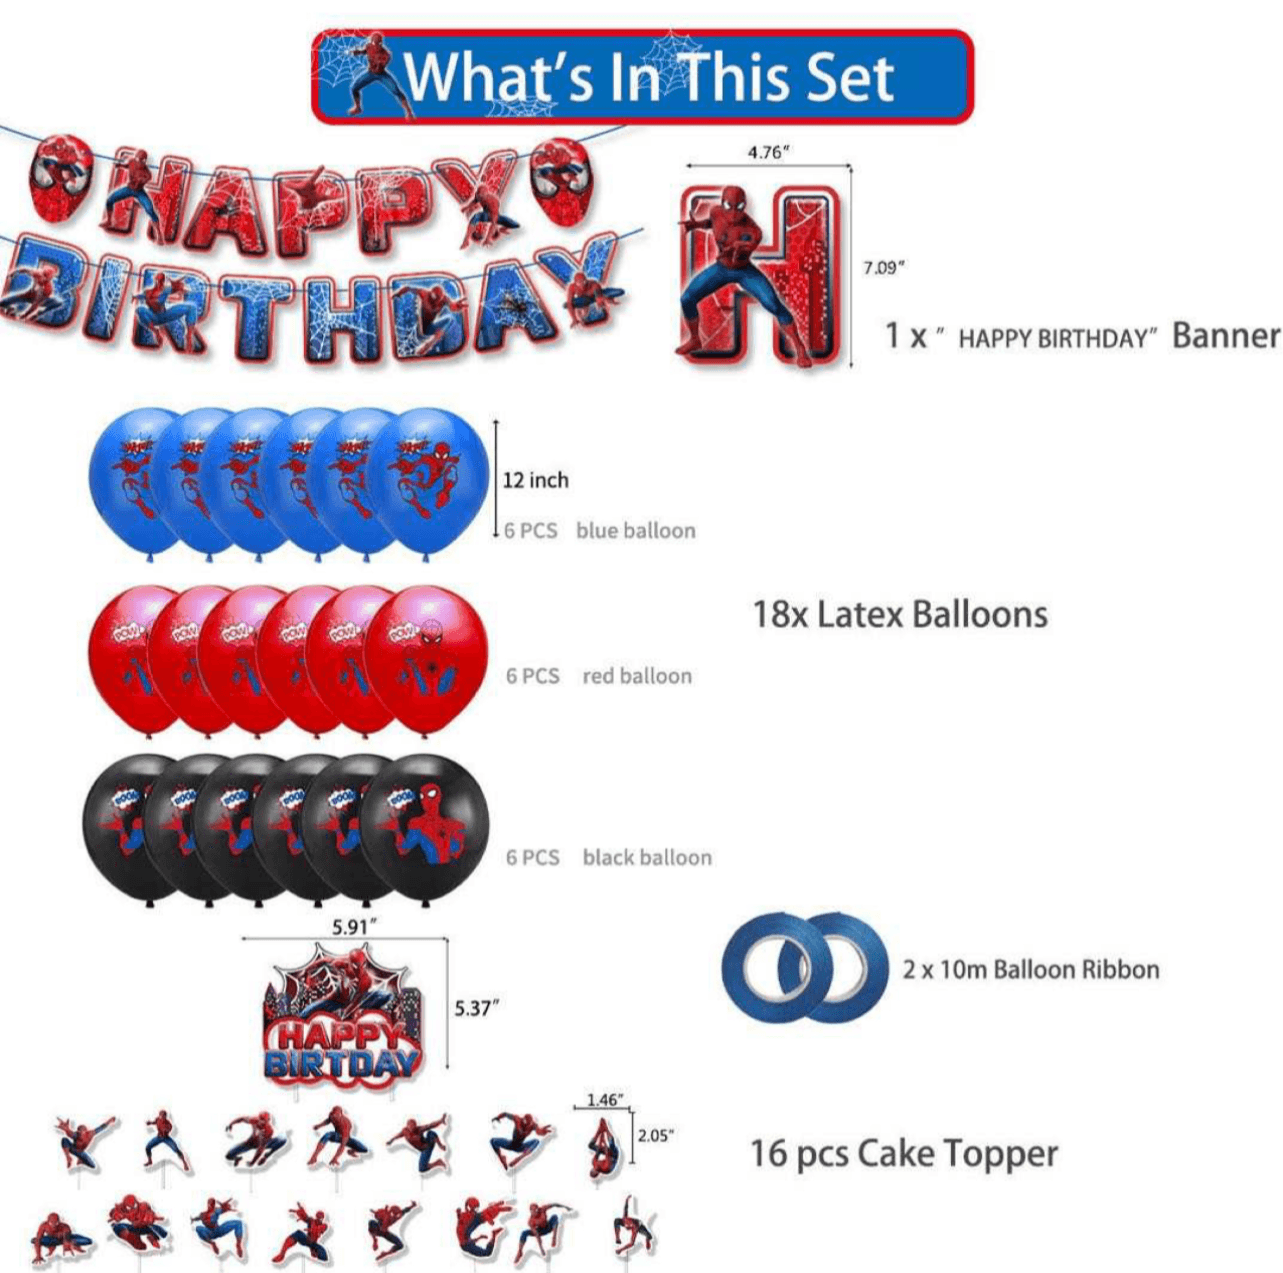 Spiderman Balloons & Banner - Expat Life Style